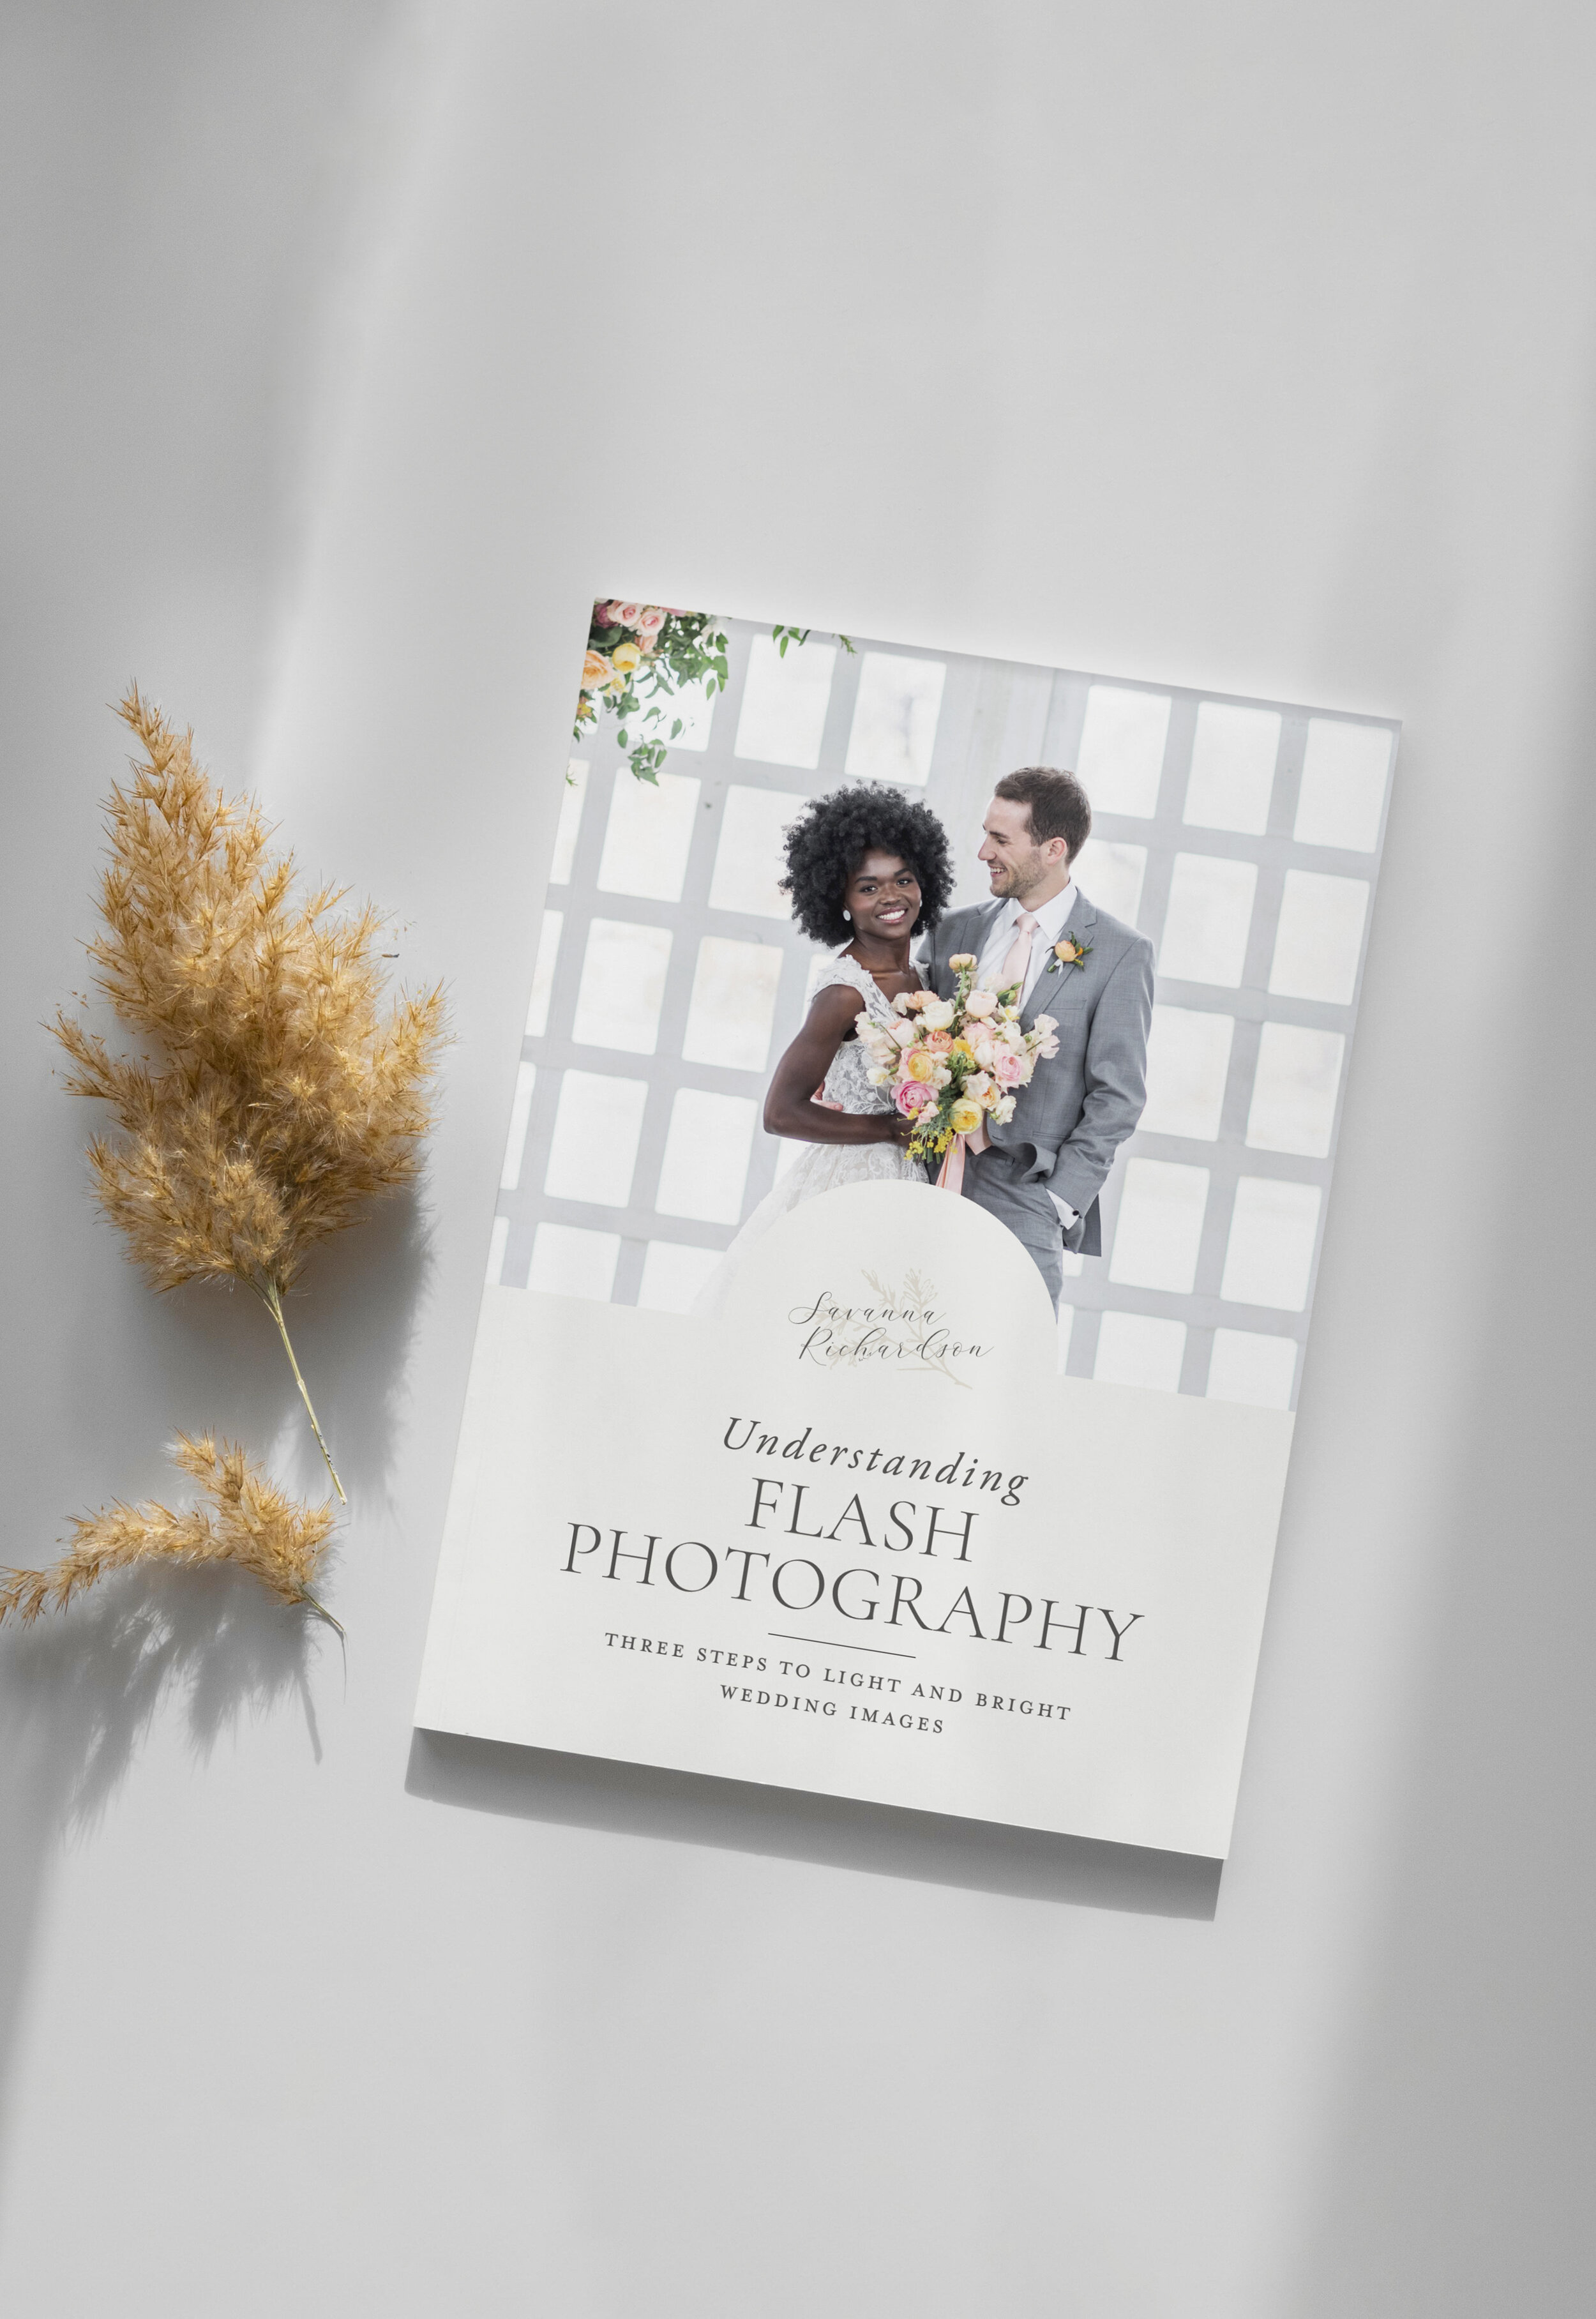  “Understanding Flash Photography - 3 steps to light and bright wedding images,” a free downloadable guide from Savanna Richardson Photography. Free pdf download how to use a flash wedding photography tips for professional photographers how to get br